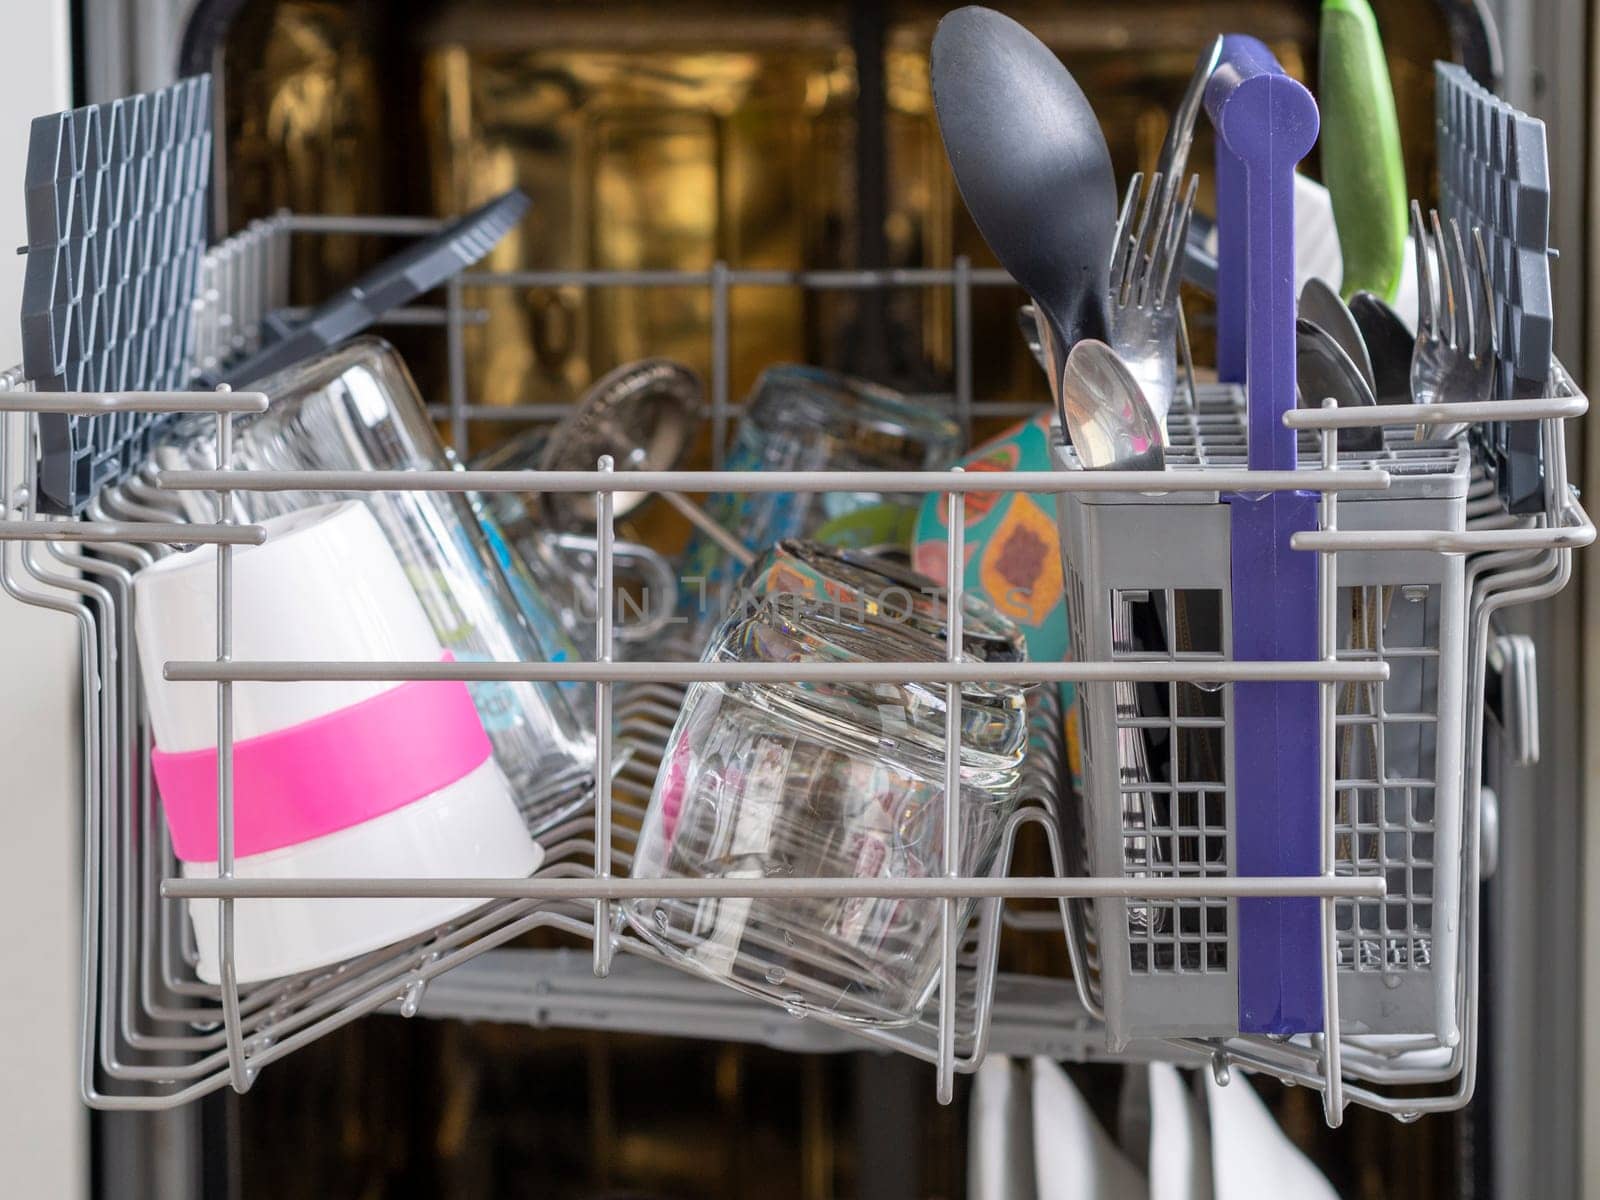 Open dishwasher with clean dishes. by Andre1ns